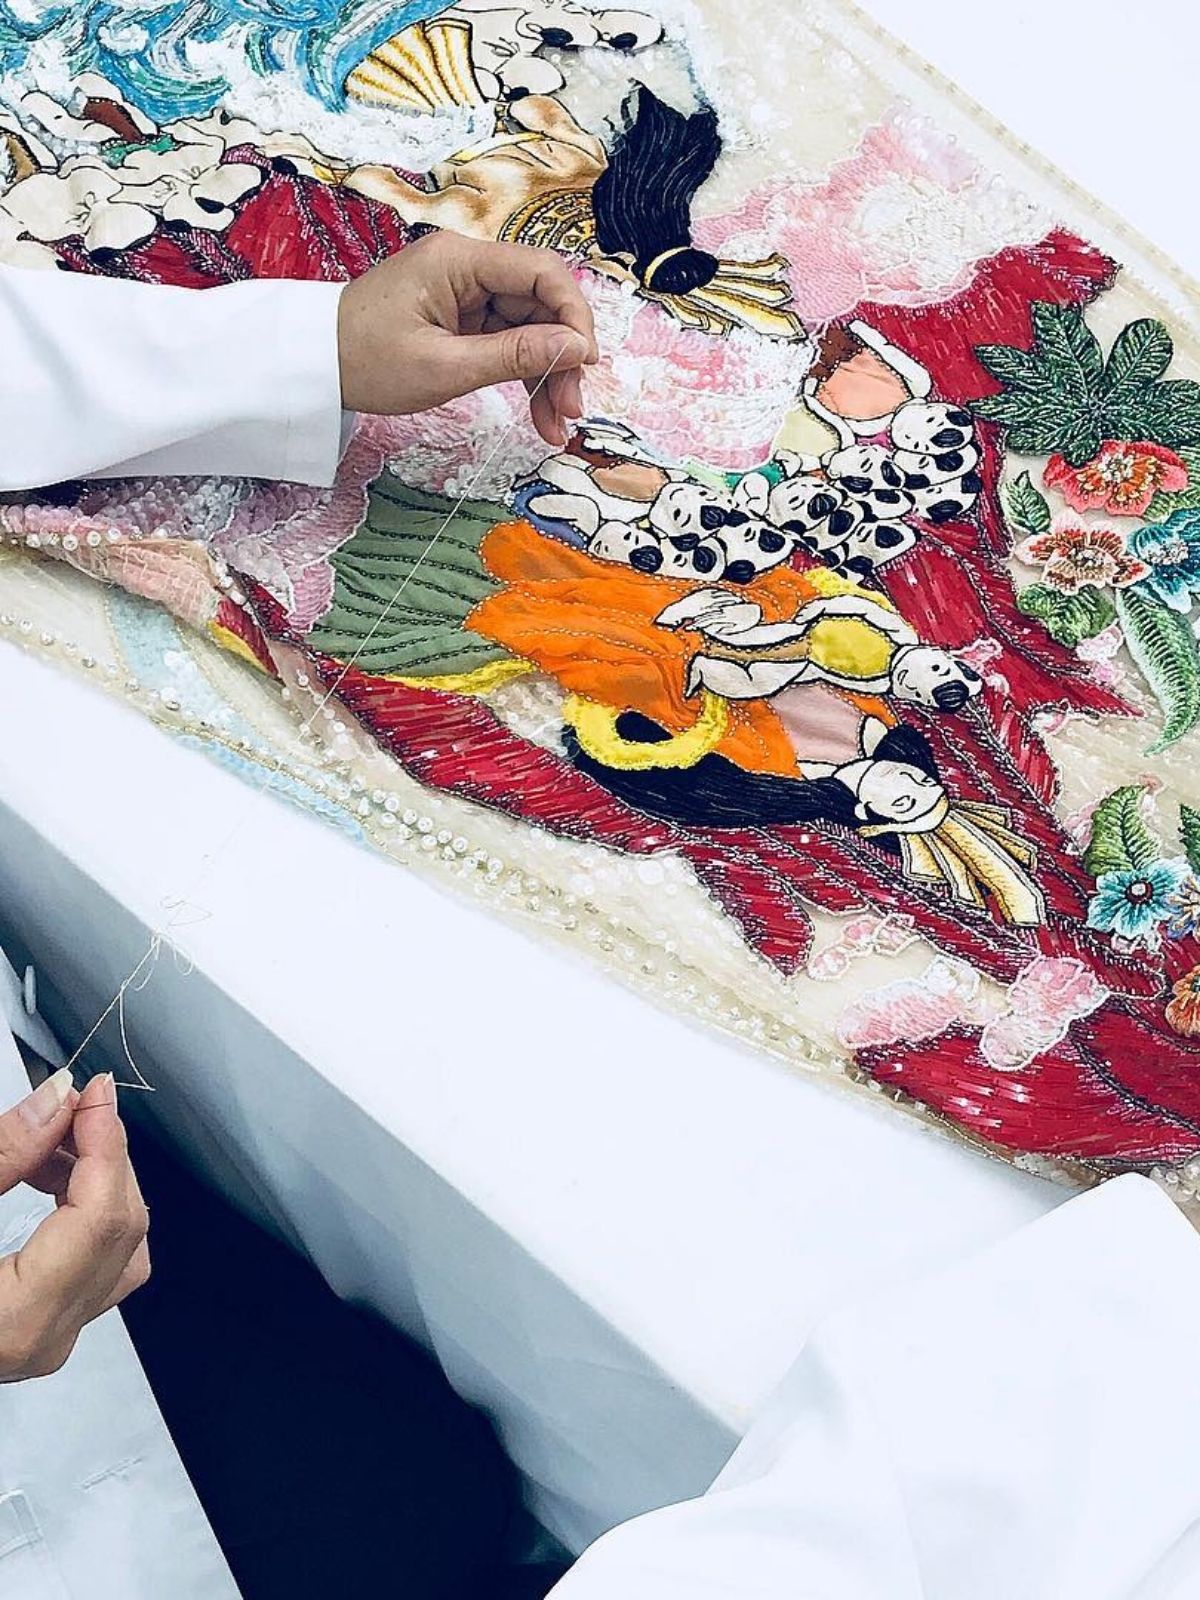 embroidery on floral dress of Nguyen Cong Tri - article on thursd